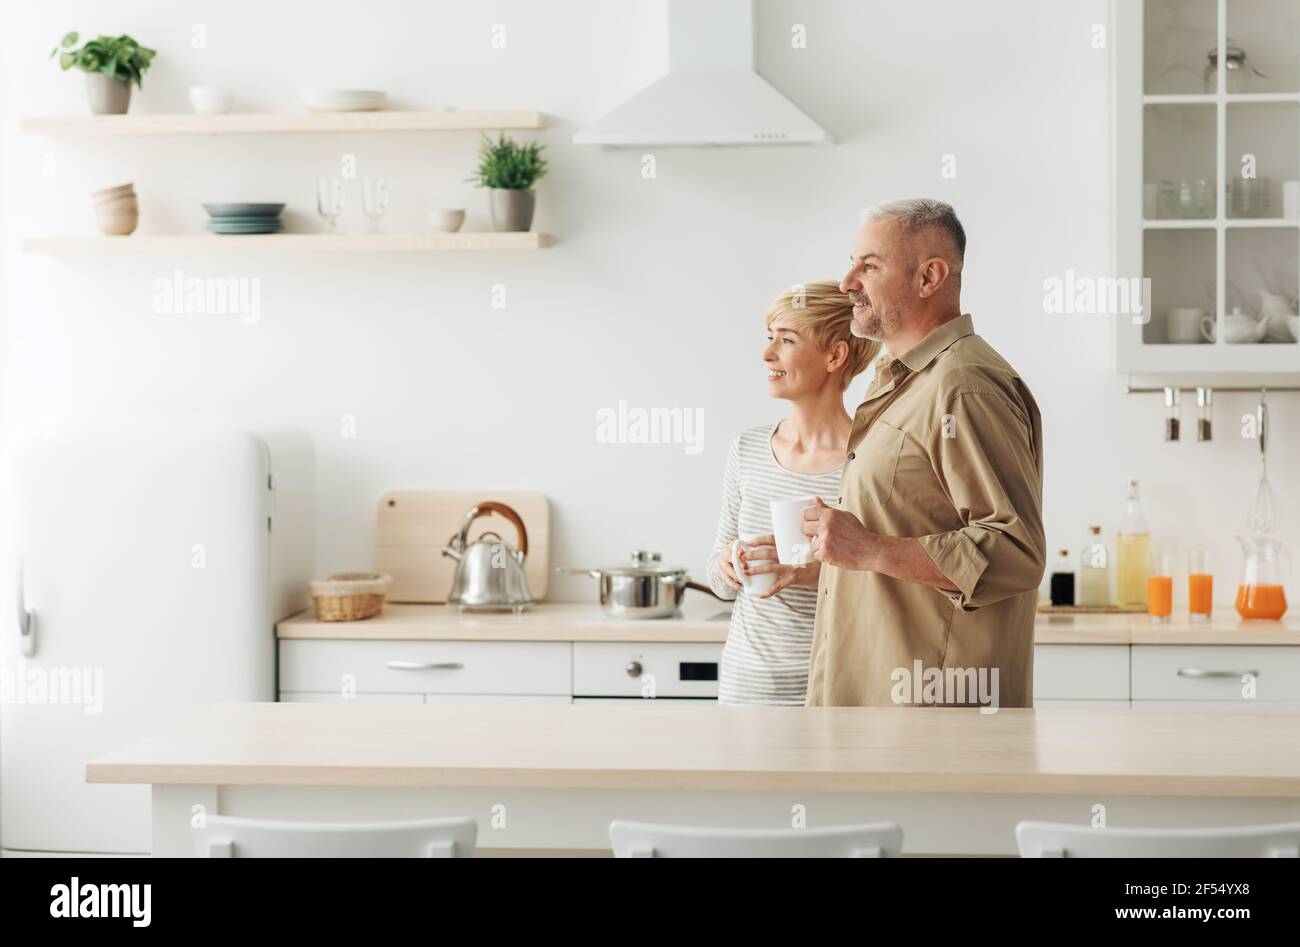 Great offer, ad, breakfast at home together, morning coffee, gentle mood Stock Photo